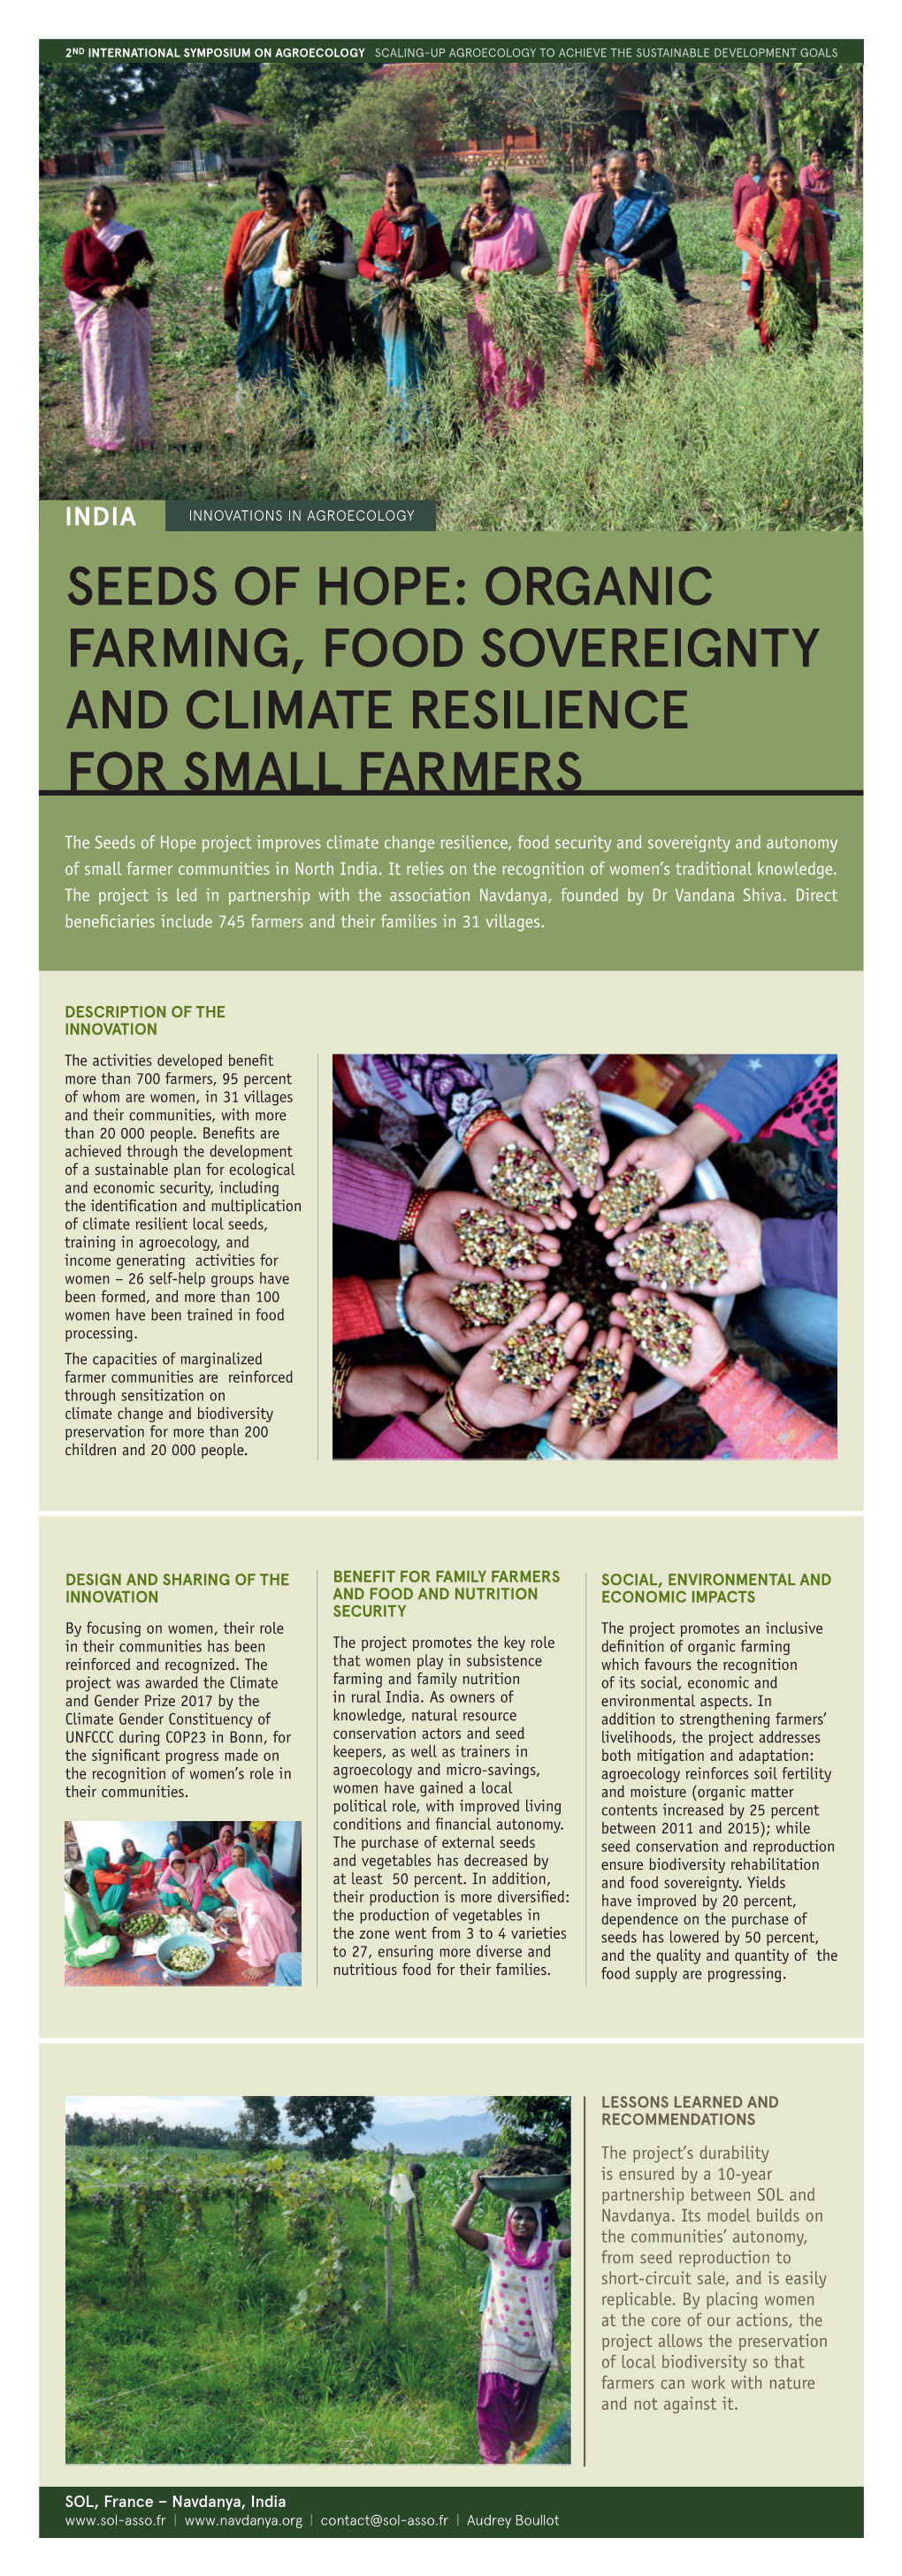 Seeds of Hope: Organic Farming, Food Sovereignty and Climate Resilience for Small Farmers